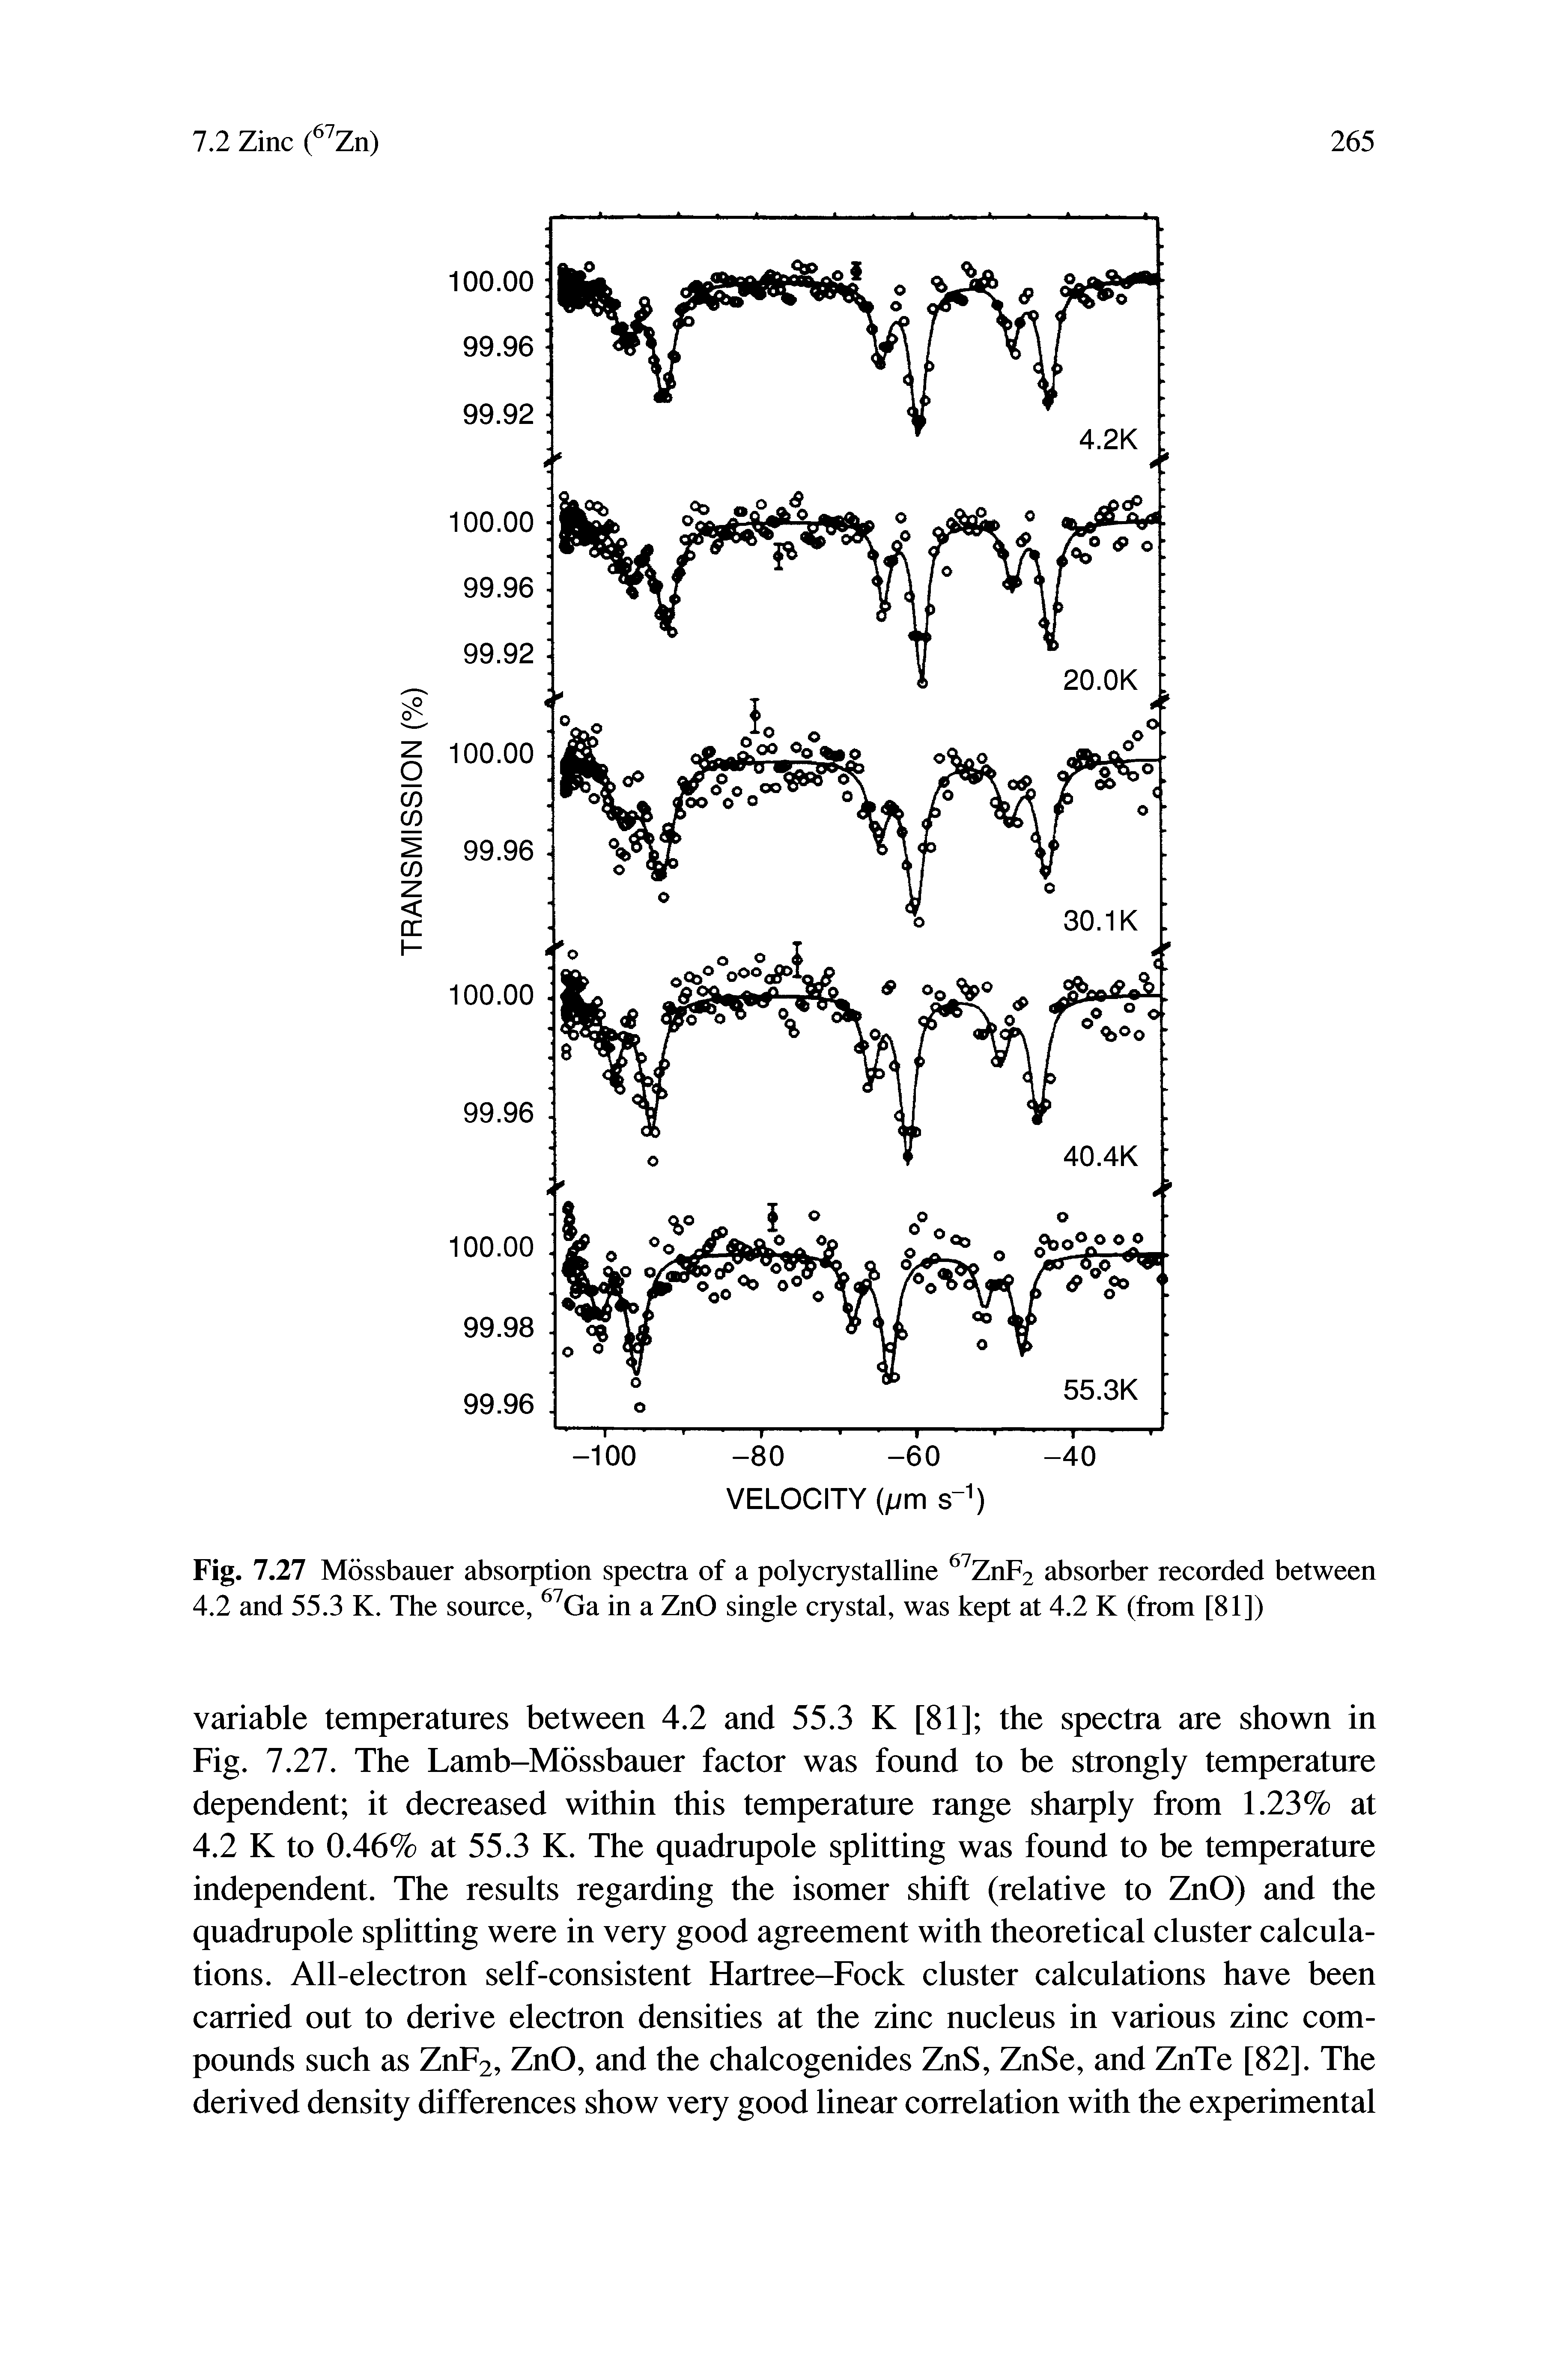 Fig. 7.27 Mossbauer absorption spectra of a polycrystalline Znp2 absorber recorded between 4.2 and 55.3 K. The source, Ga in a ZnO single crystal, was kept at 4.2 K (from [81])...